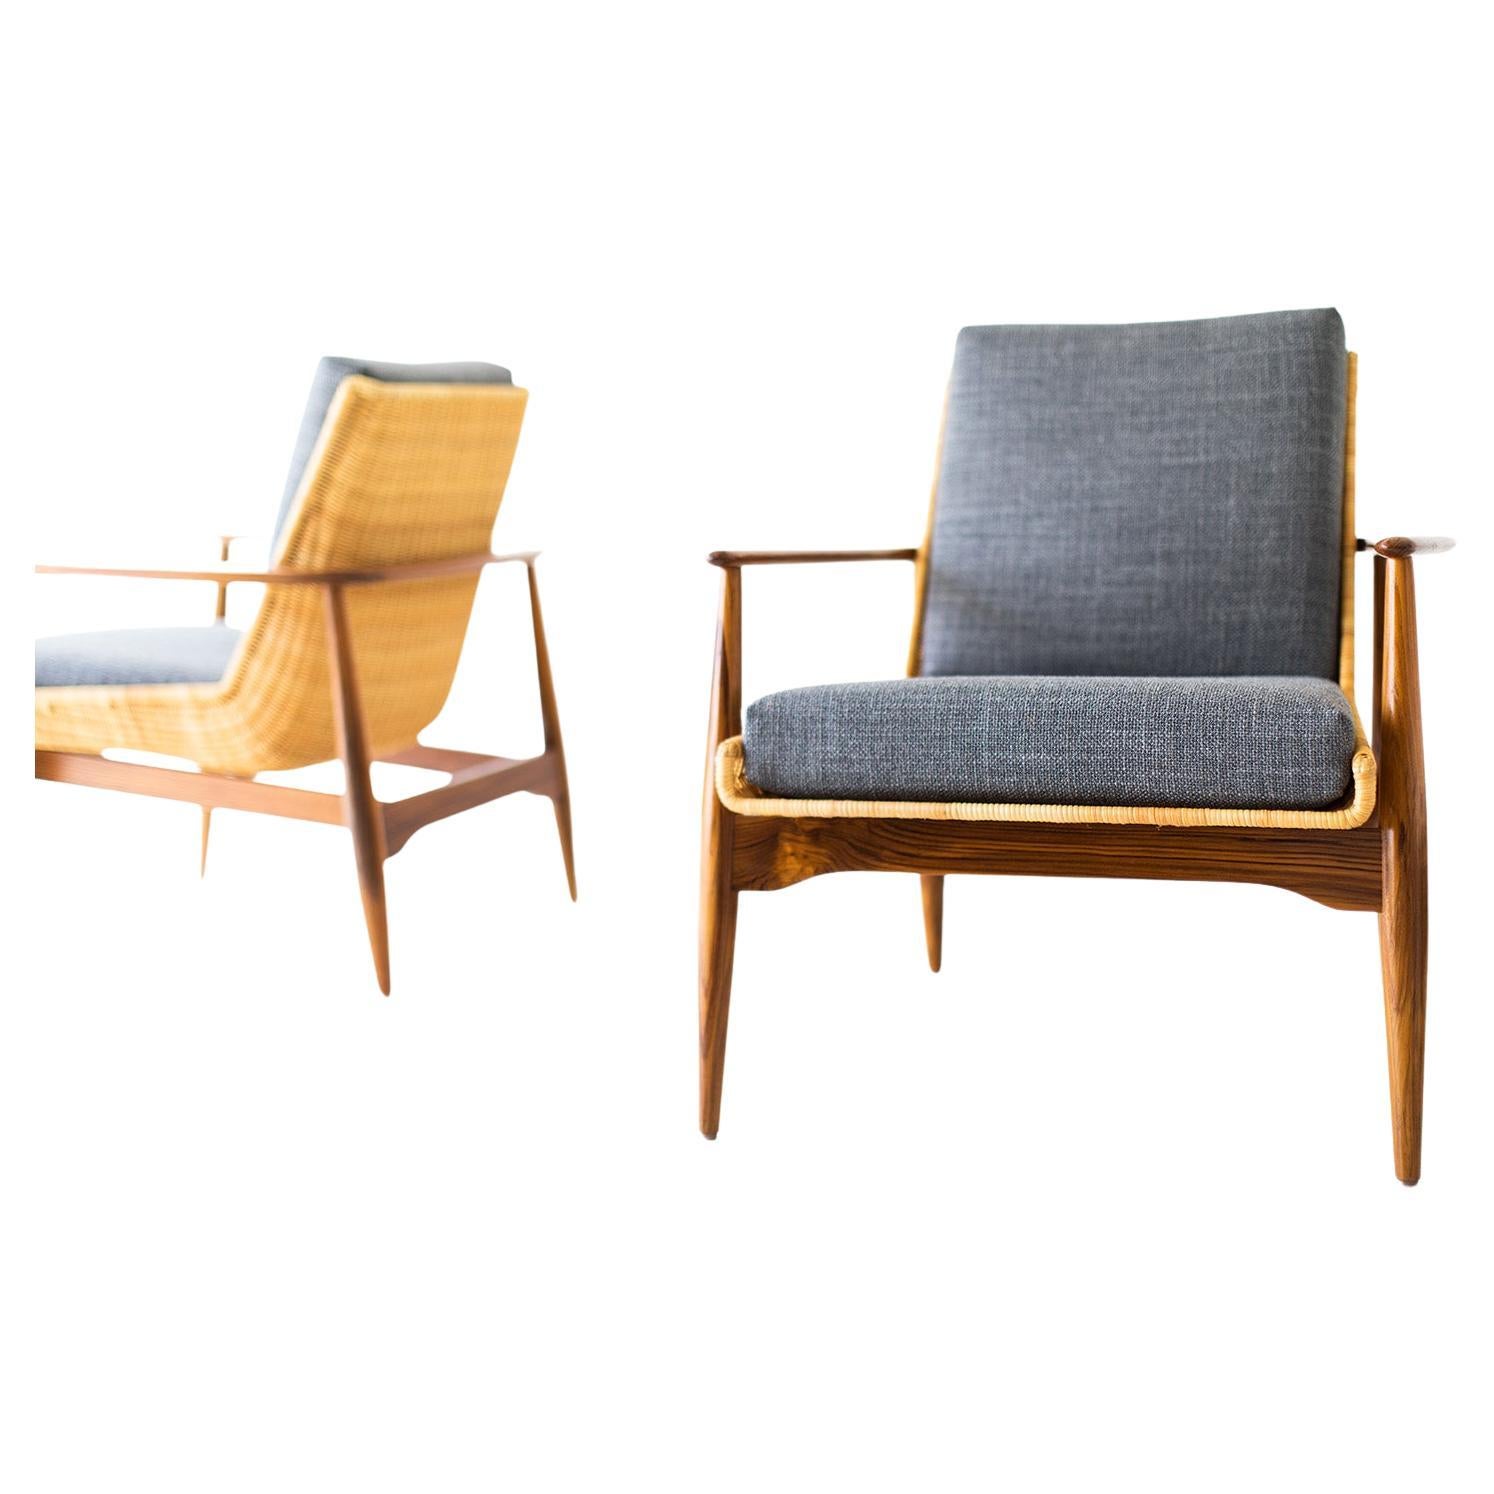 Peabody Wicker Chairs, Modern Wicker Chairs, Teak and Thick Weave  For Sale